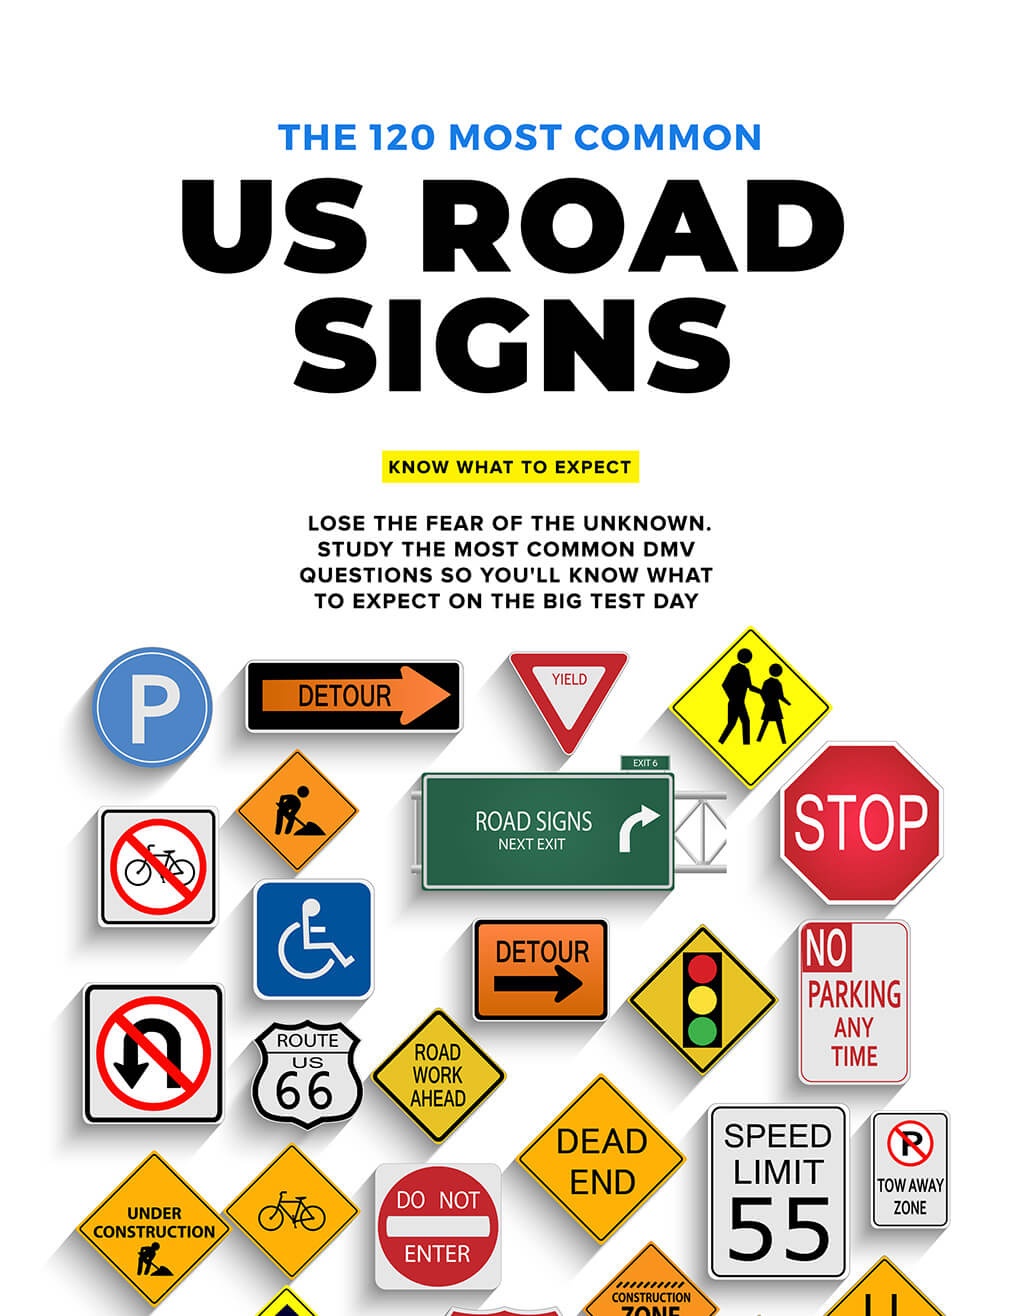 Written Test For Driving Indiana Bmv Road Signs Permit Practice Free